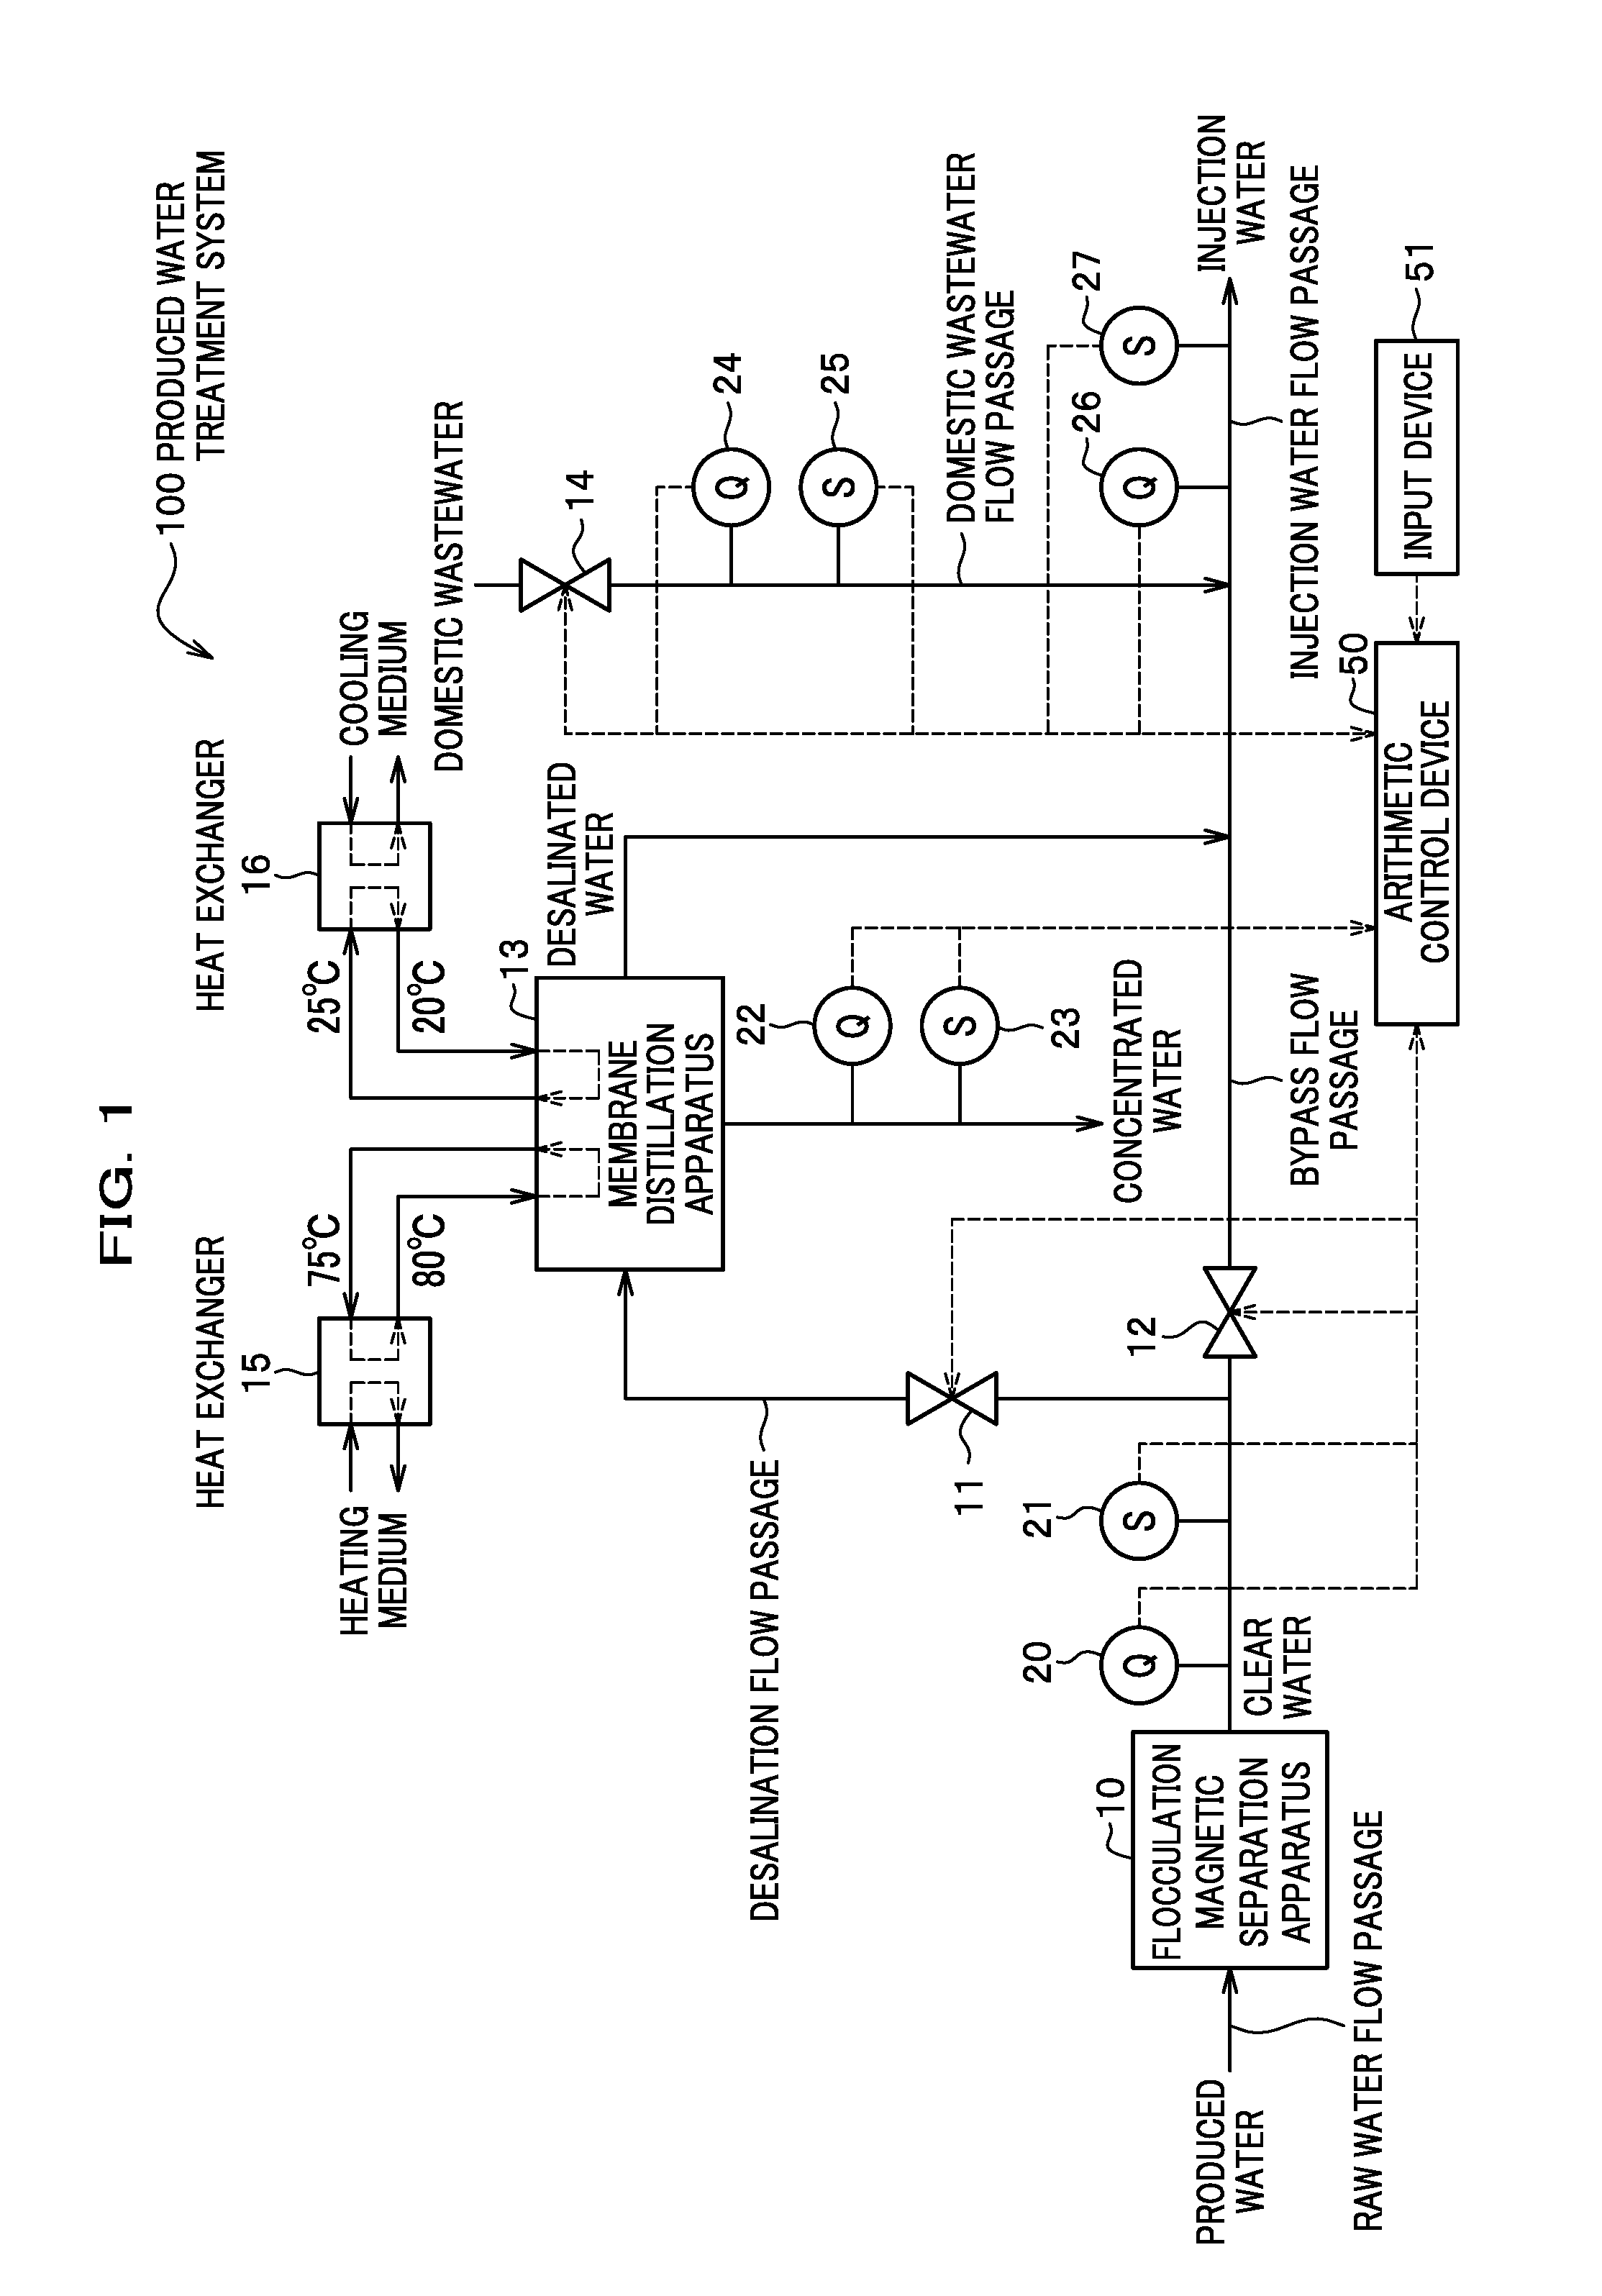 Produced water treatment system